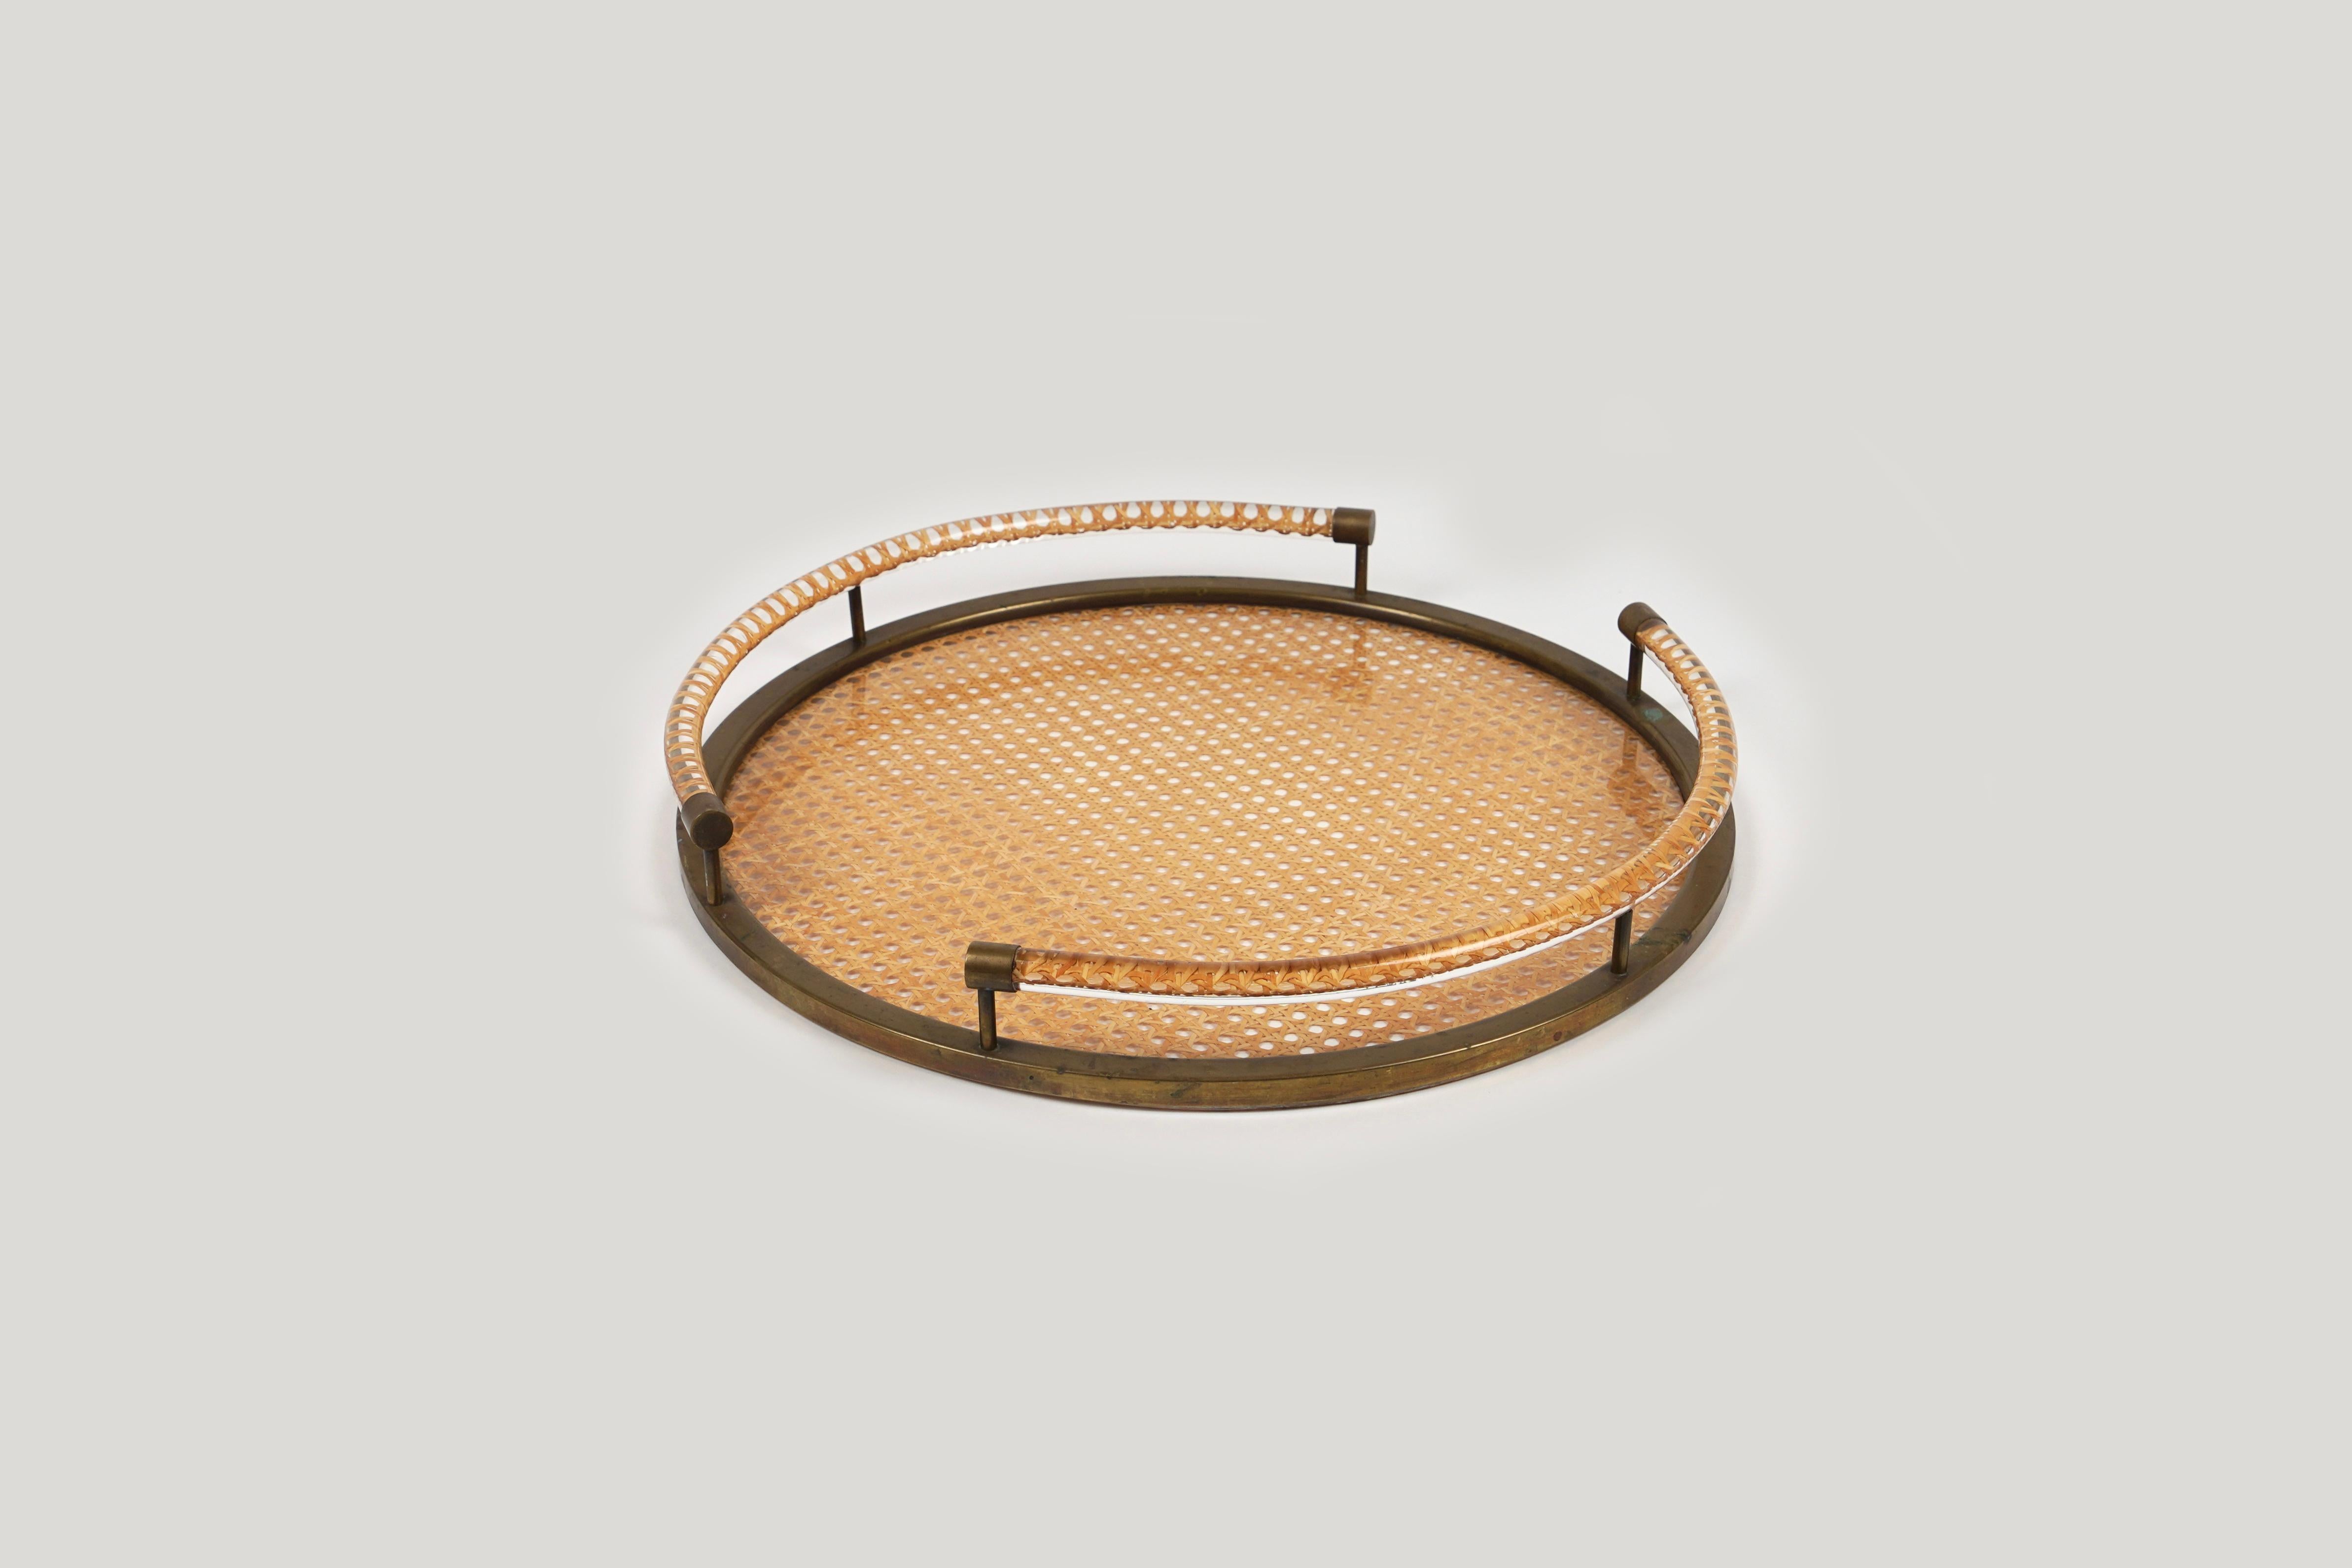 Midcentury amazing round serving tray / centerpiece in lucite and rattan with brass border in the style of Christian Dior Home. 

Made in Italy in the 1970s. 

Great accessory for any modern interior.